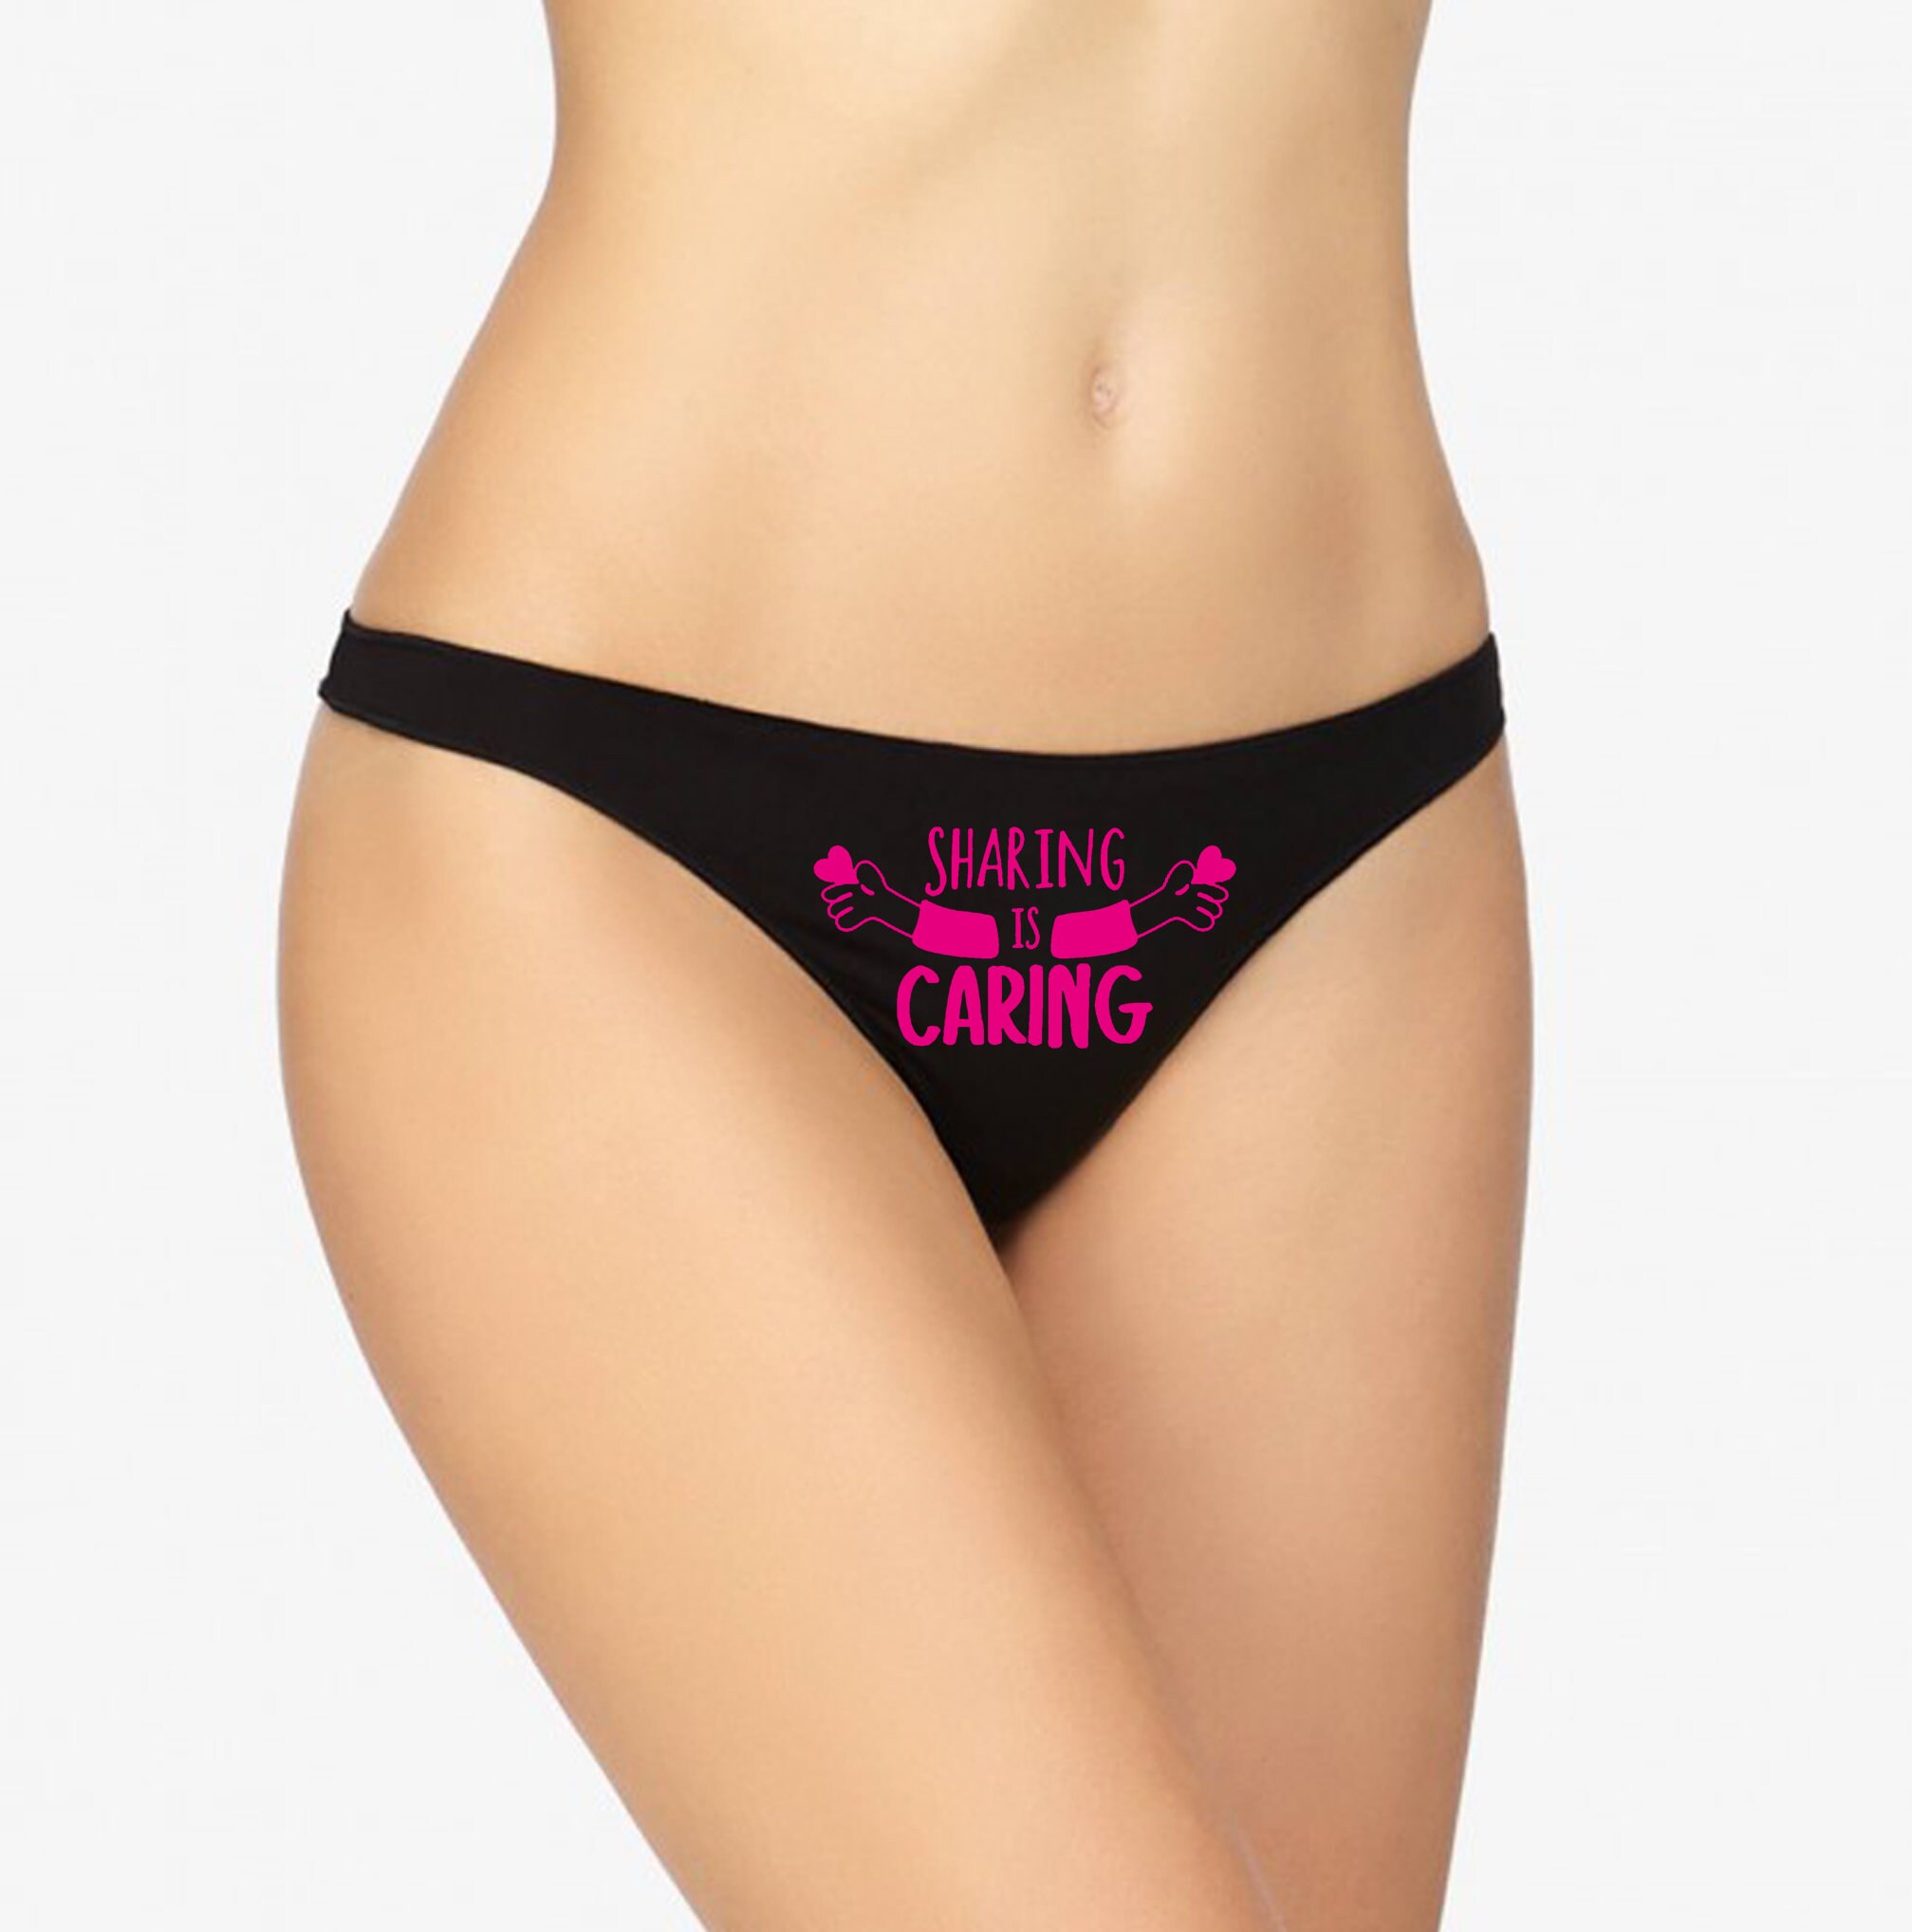 Bend Me Over and Pull Them to the Side Panties Sexy Gift Funny